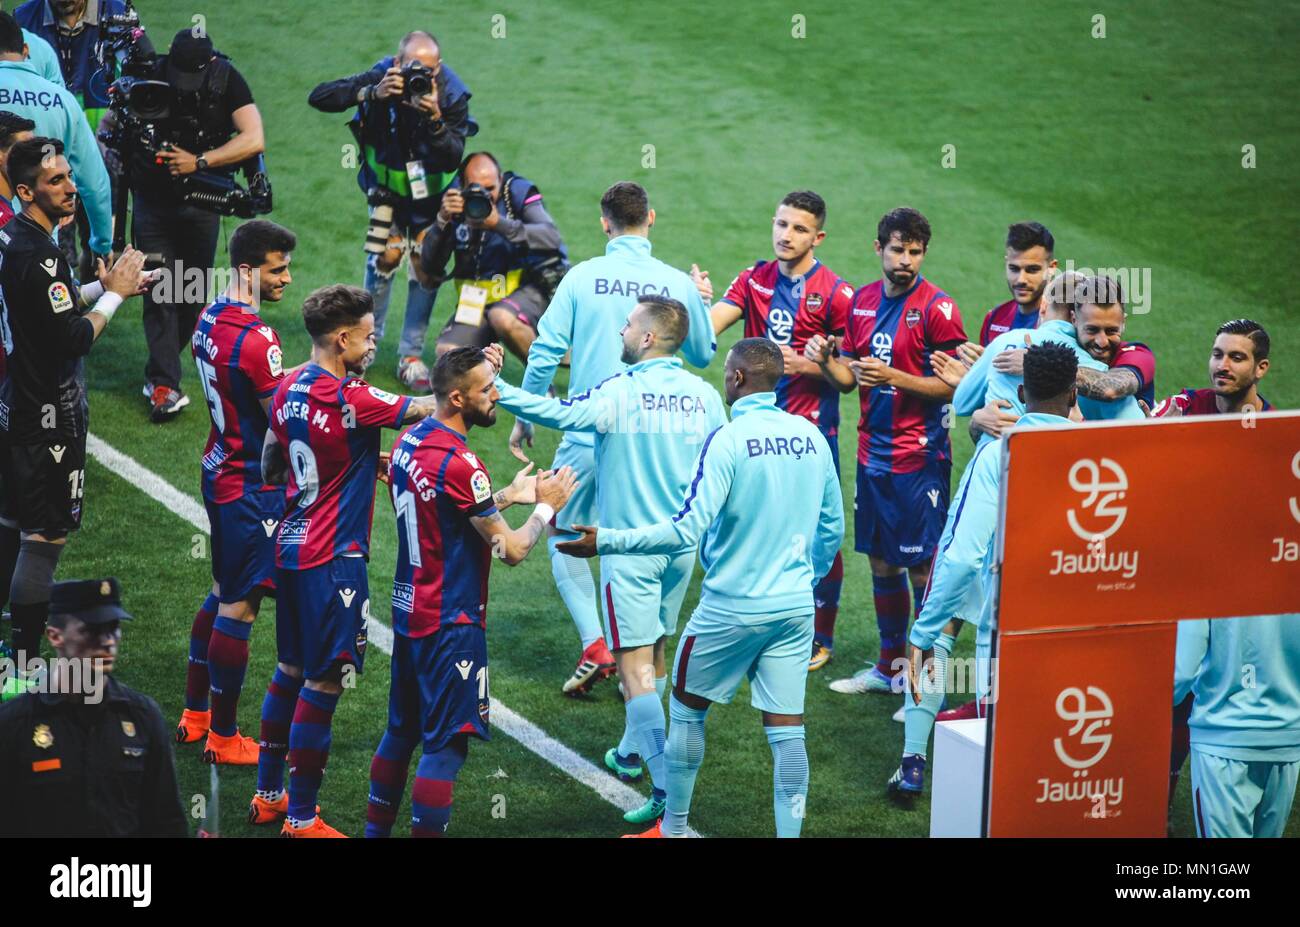 Valencia, Spain. 13th May, 2018. The Levante players pay homenage to the FC Barcelona players during the match between Levante UD and FC Barcelona at the stadium Ciudad de Valencia  Cordon Press Credit: CORDON PRESS/Alamy Live News Stock Photo